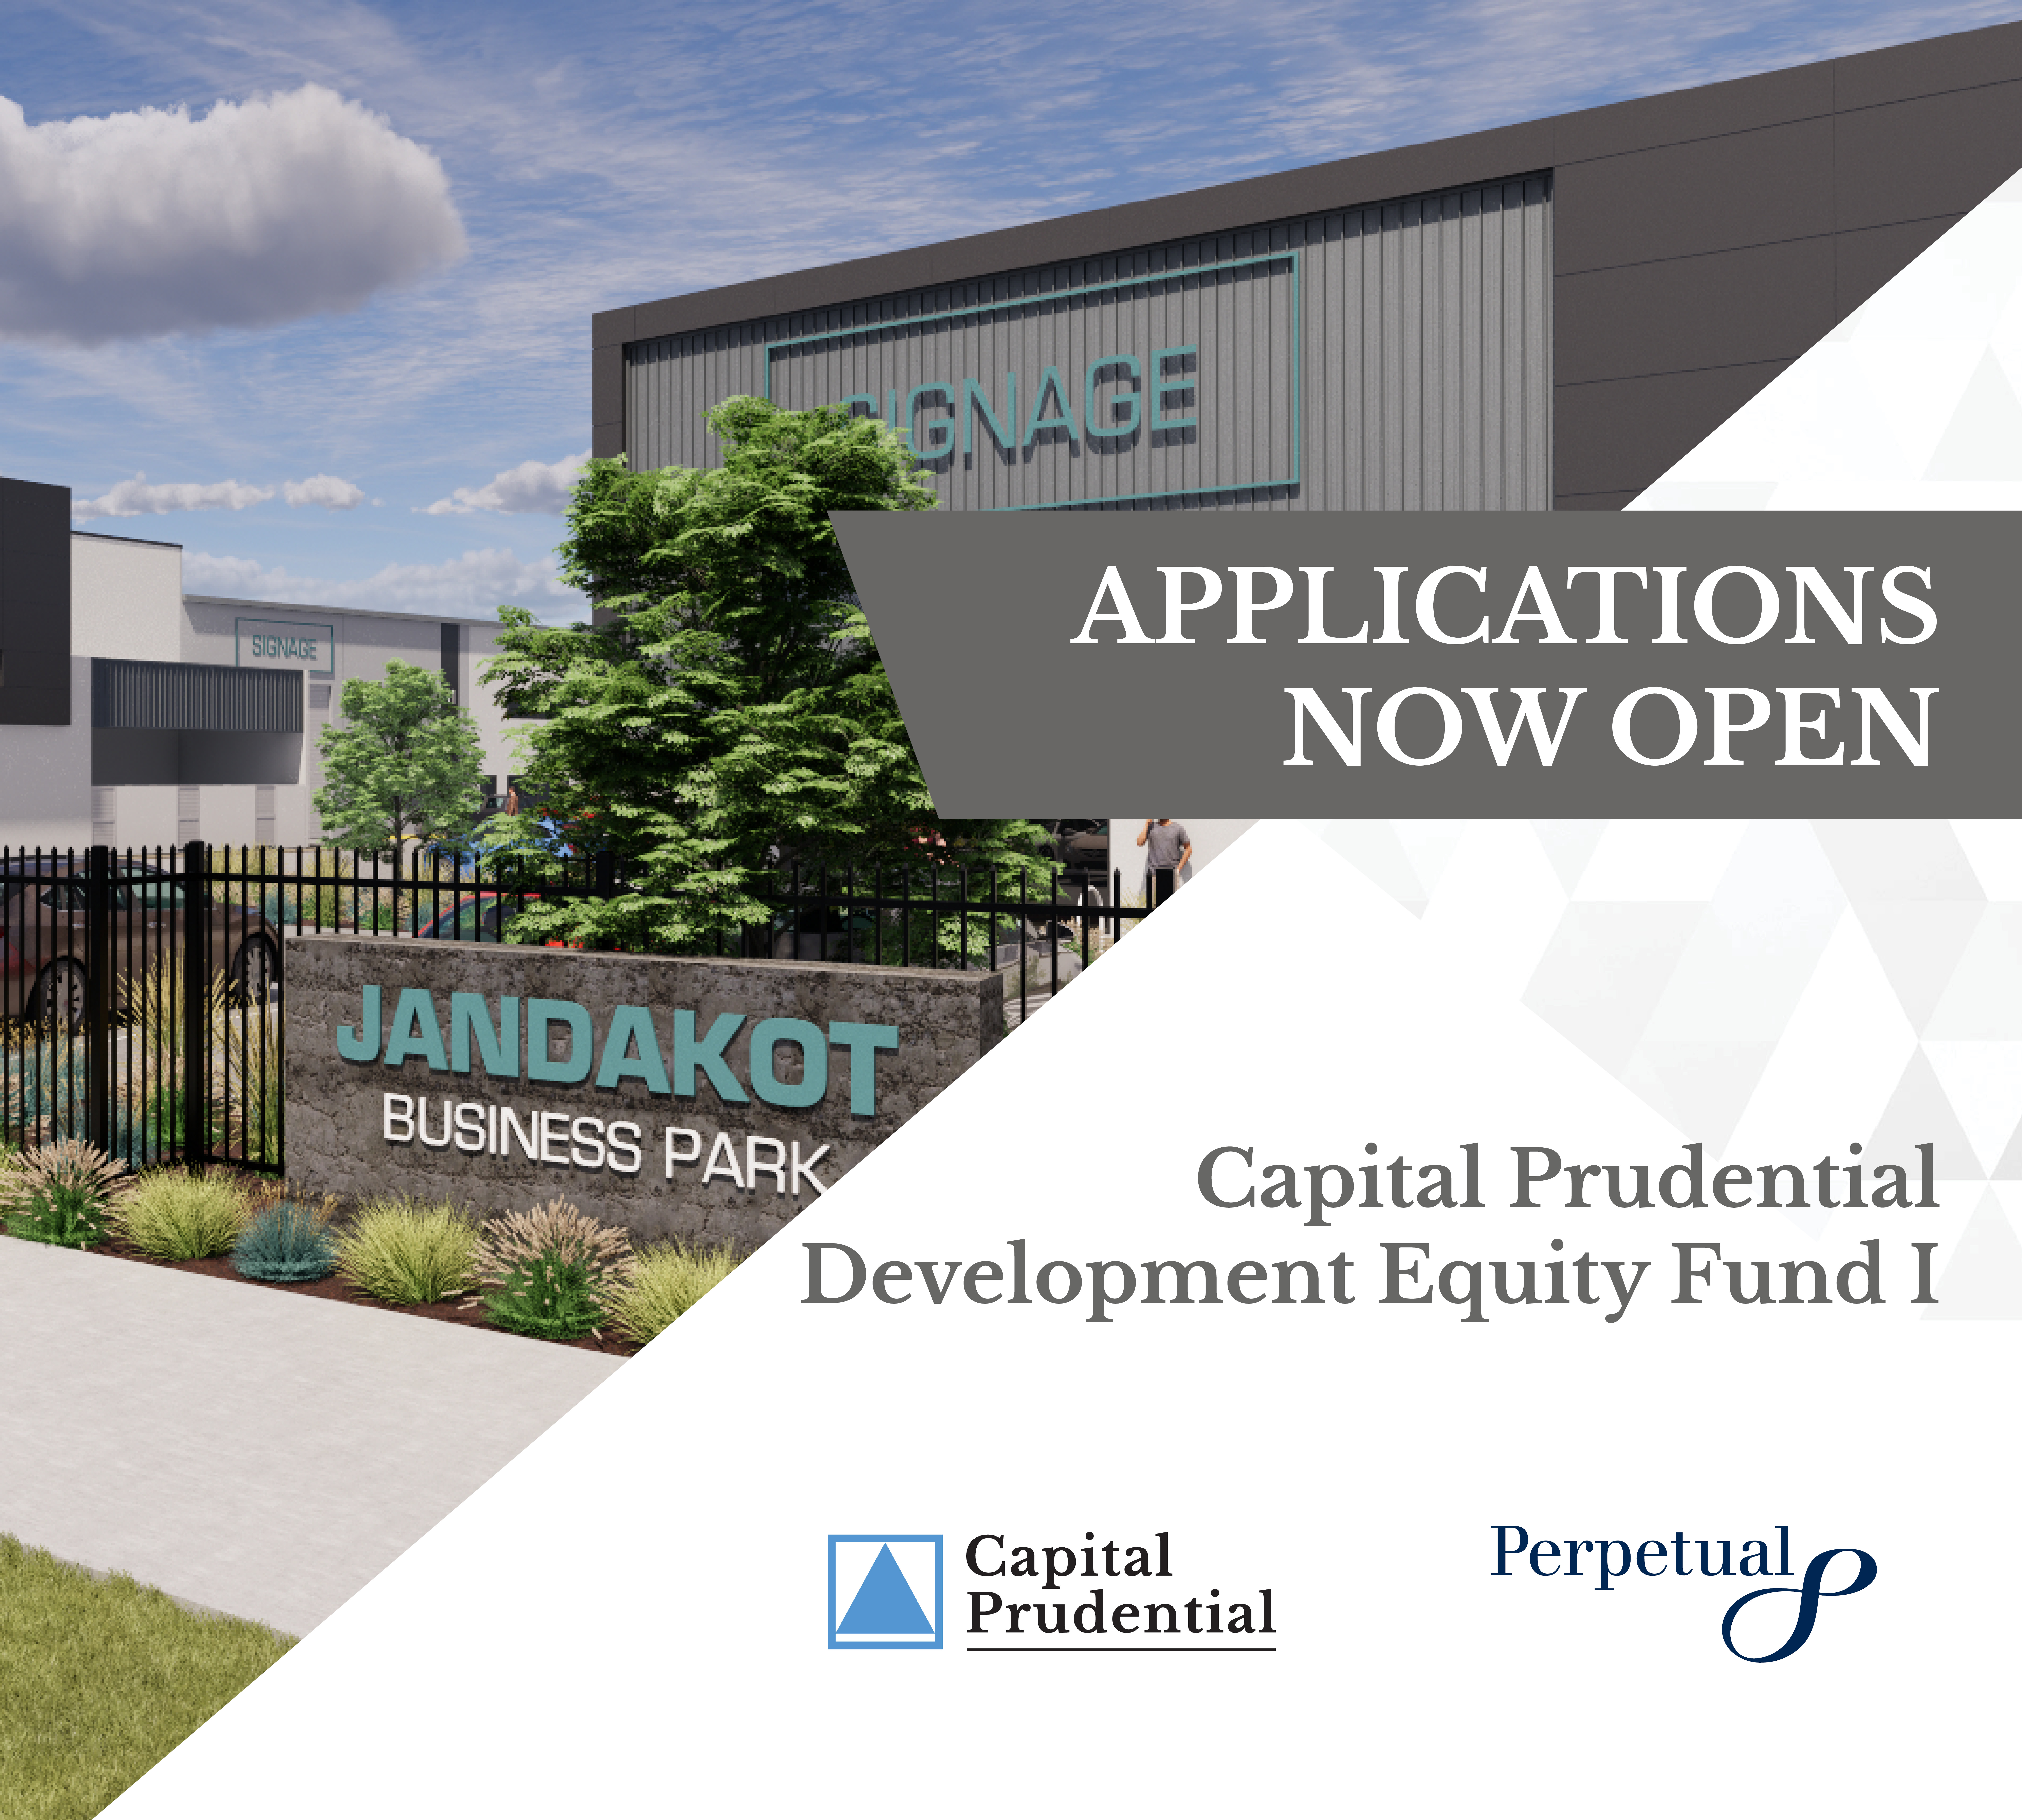 Capital Prudential Development Equity Fund I - Applications Now Open